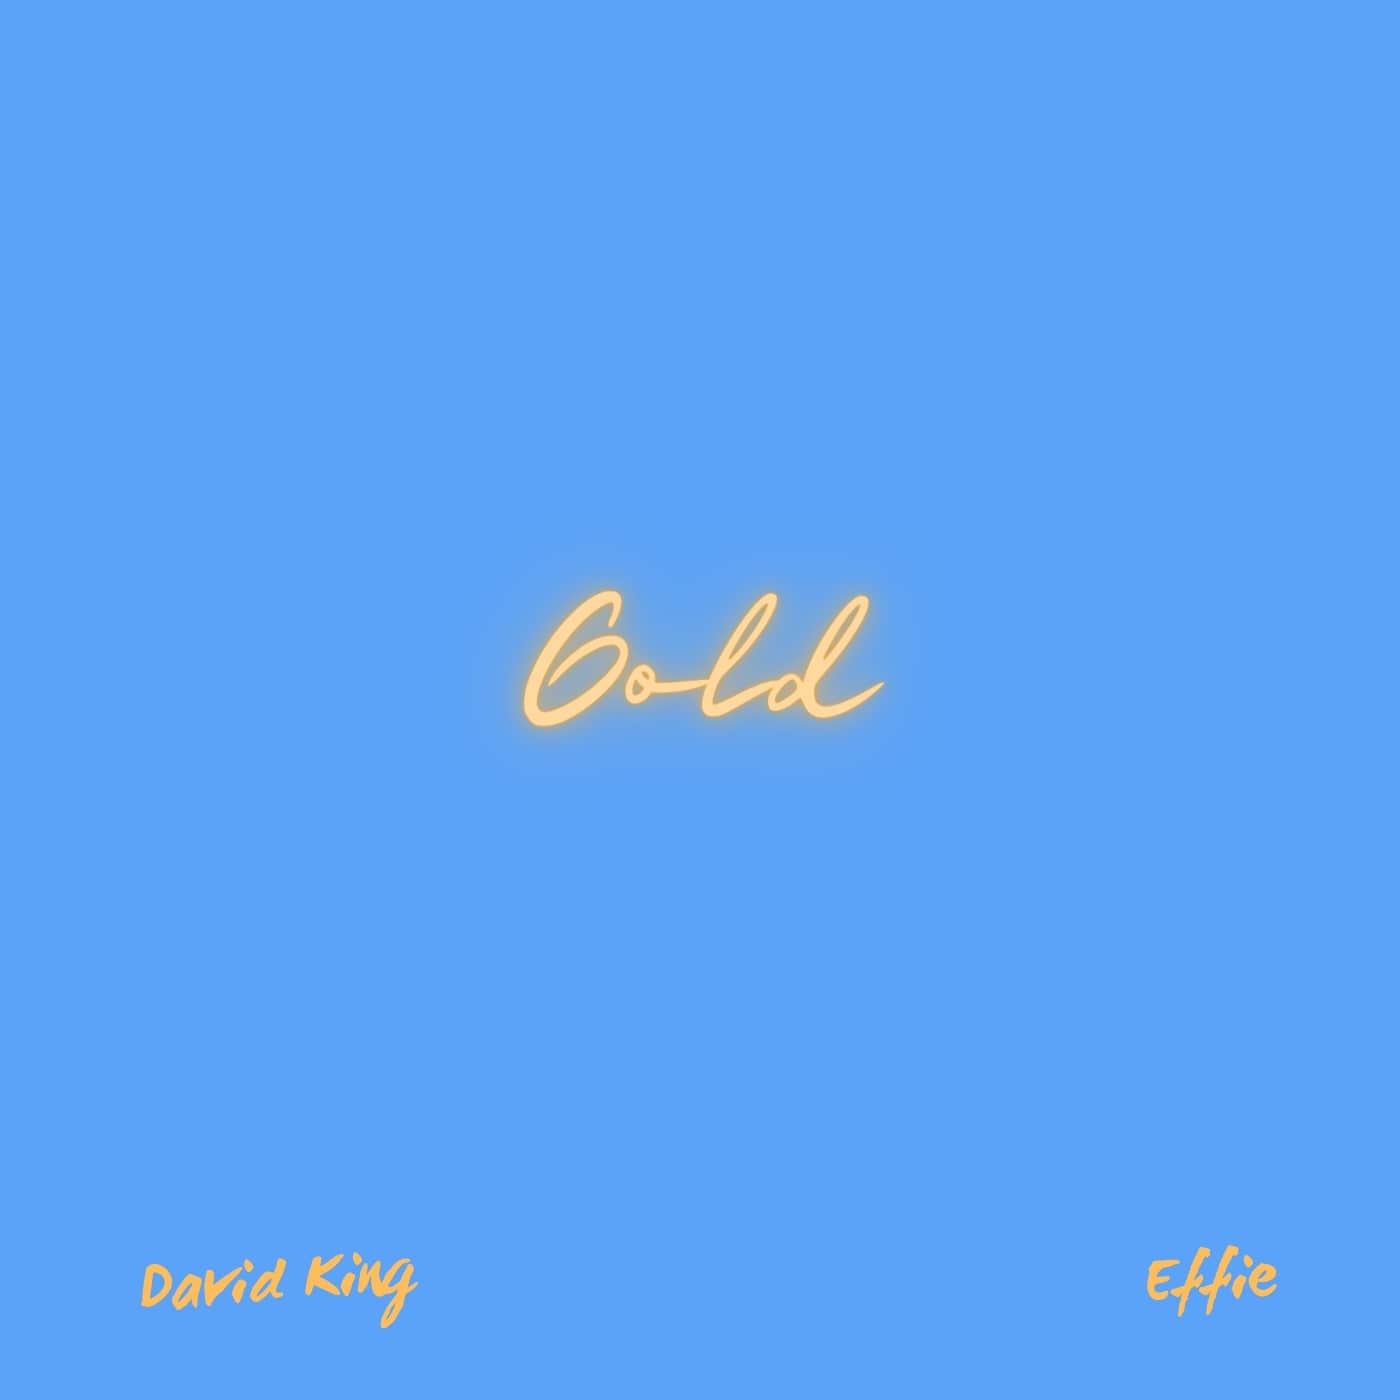 David King Radiates Infectious Positivity In “Gold”